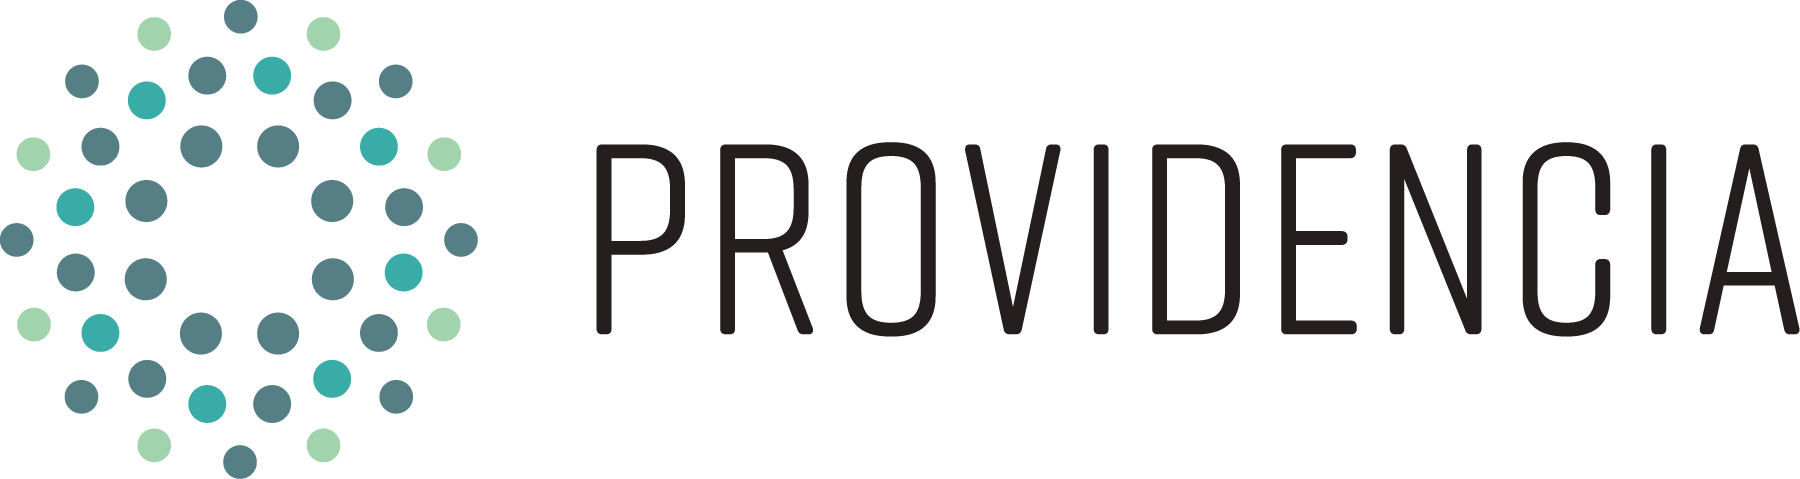 The Providencia Group